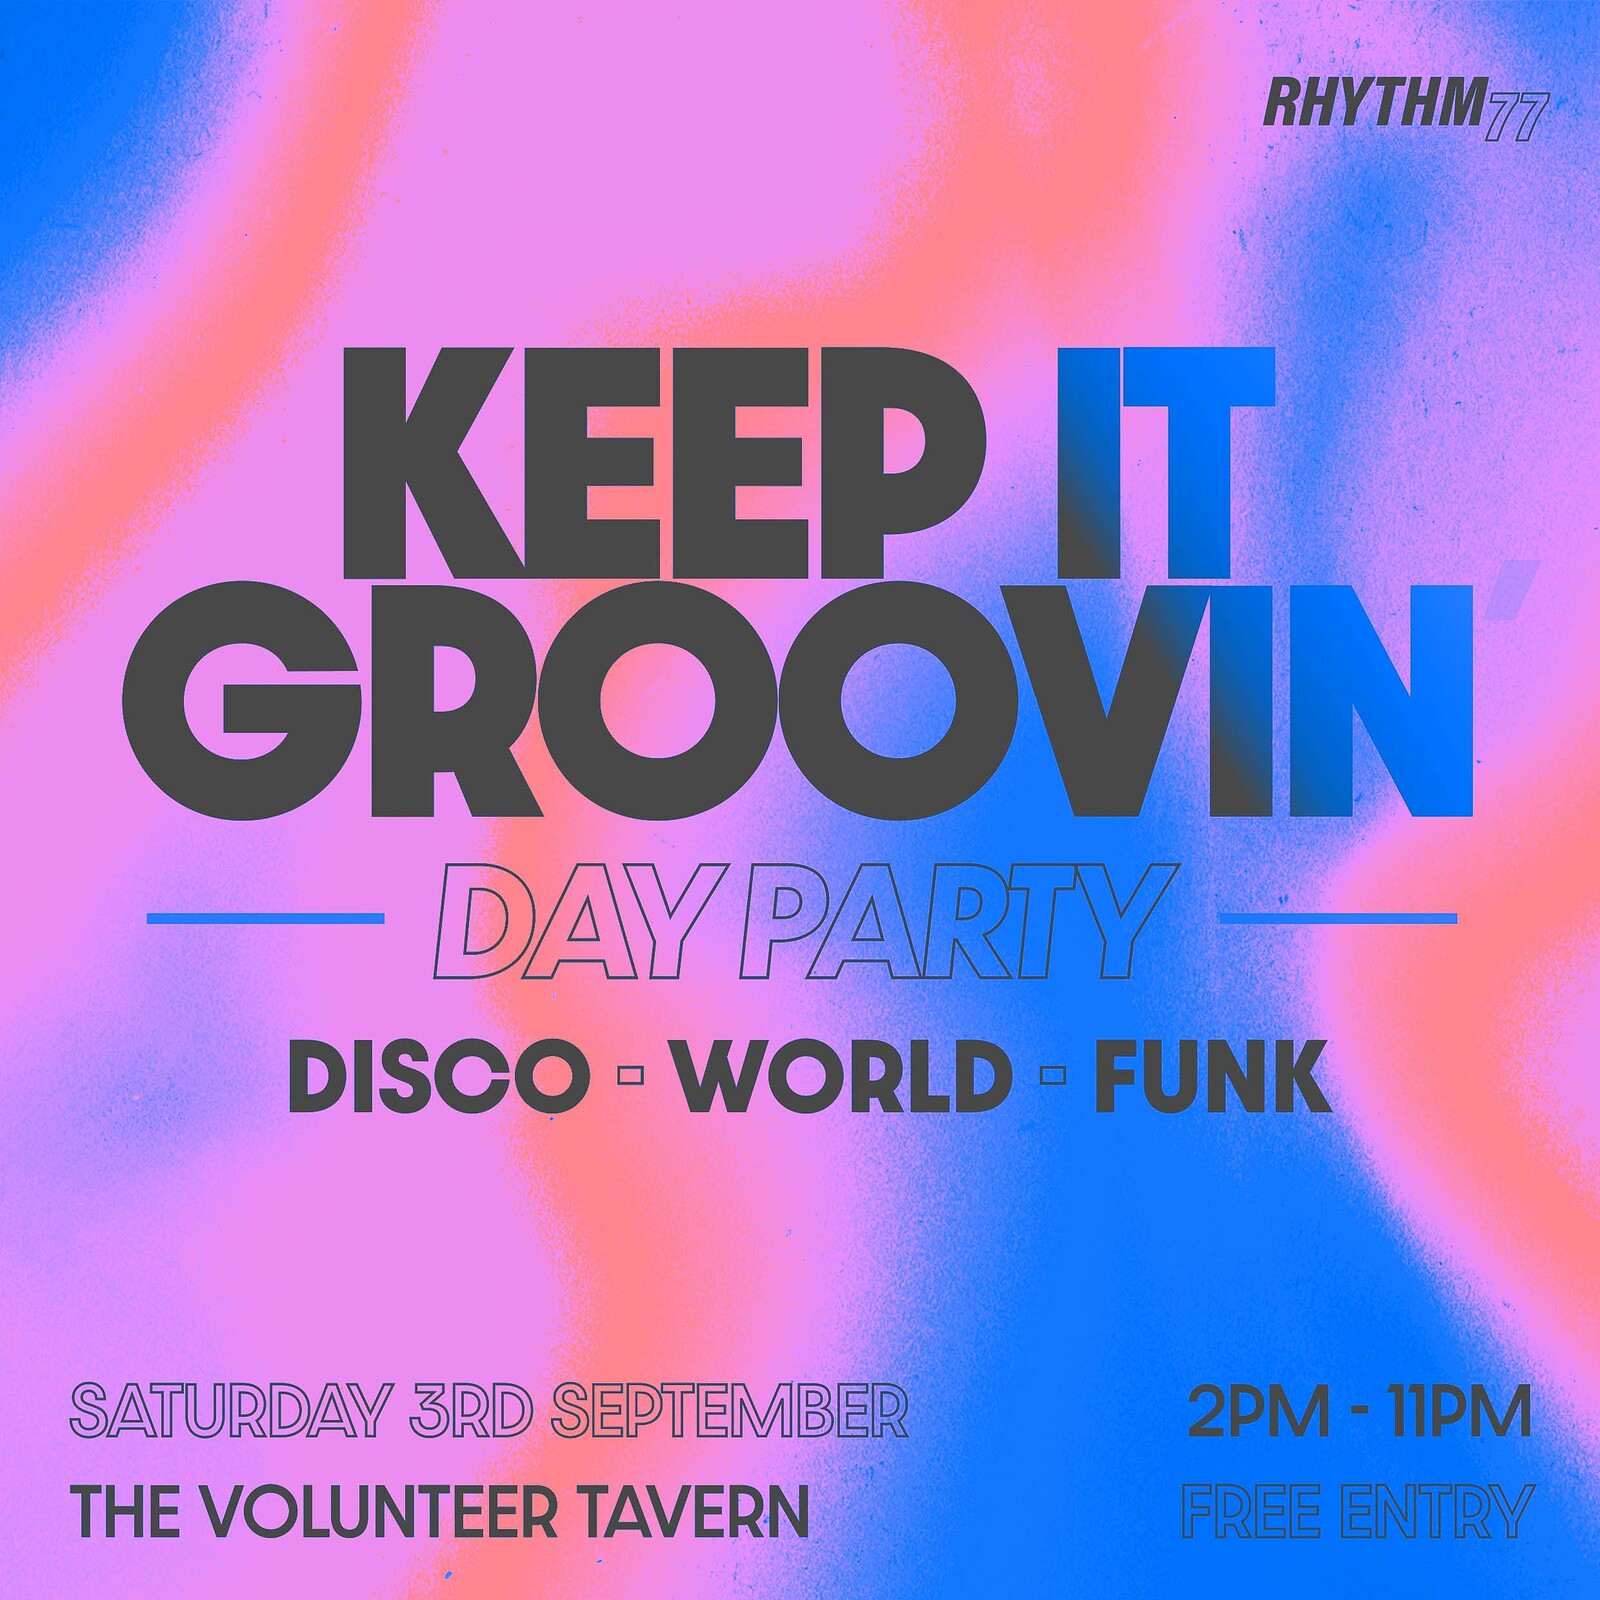 Keep It Groovin' - Day Party at The Volunteer Tavern